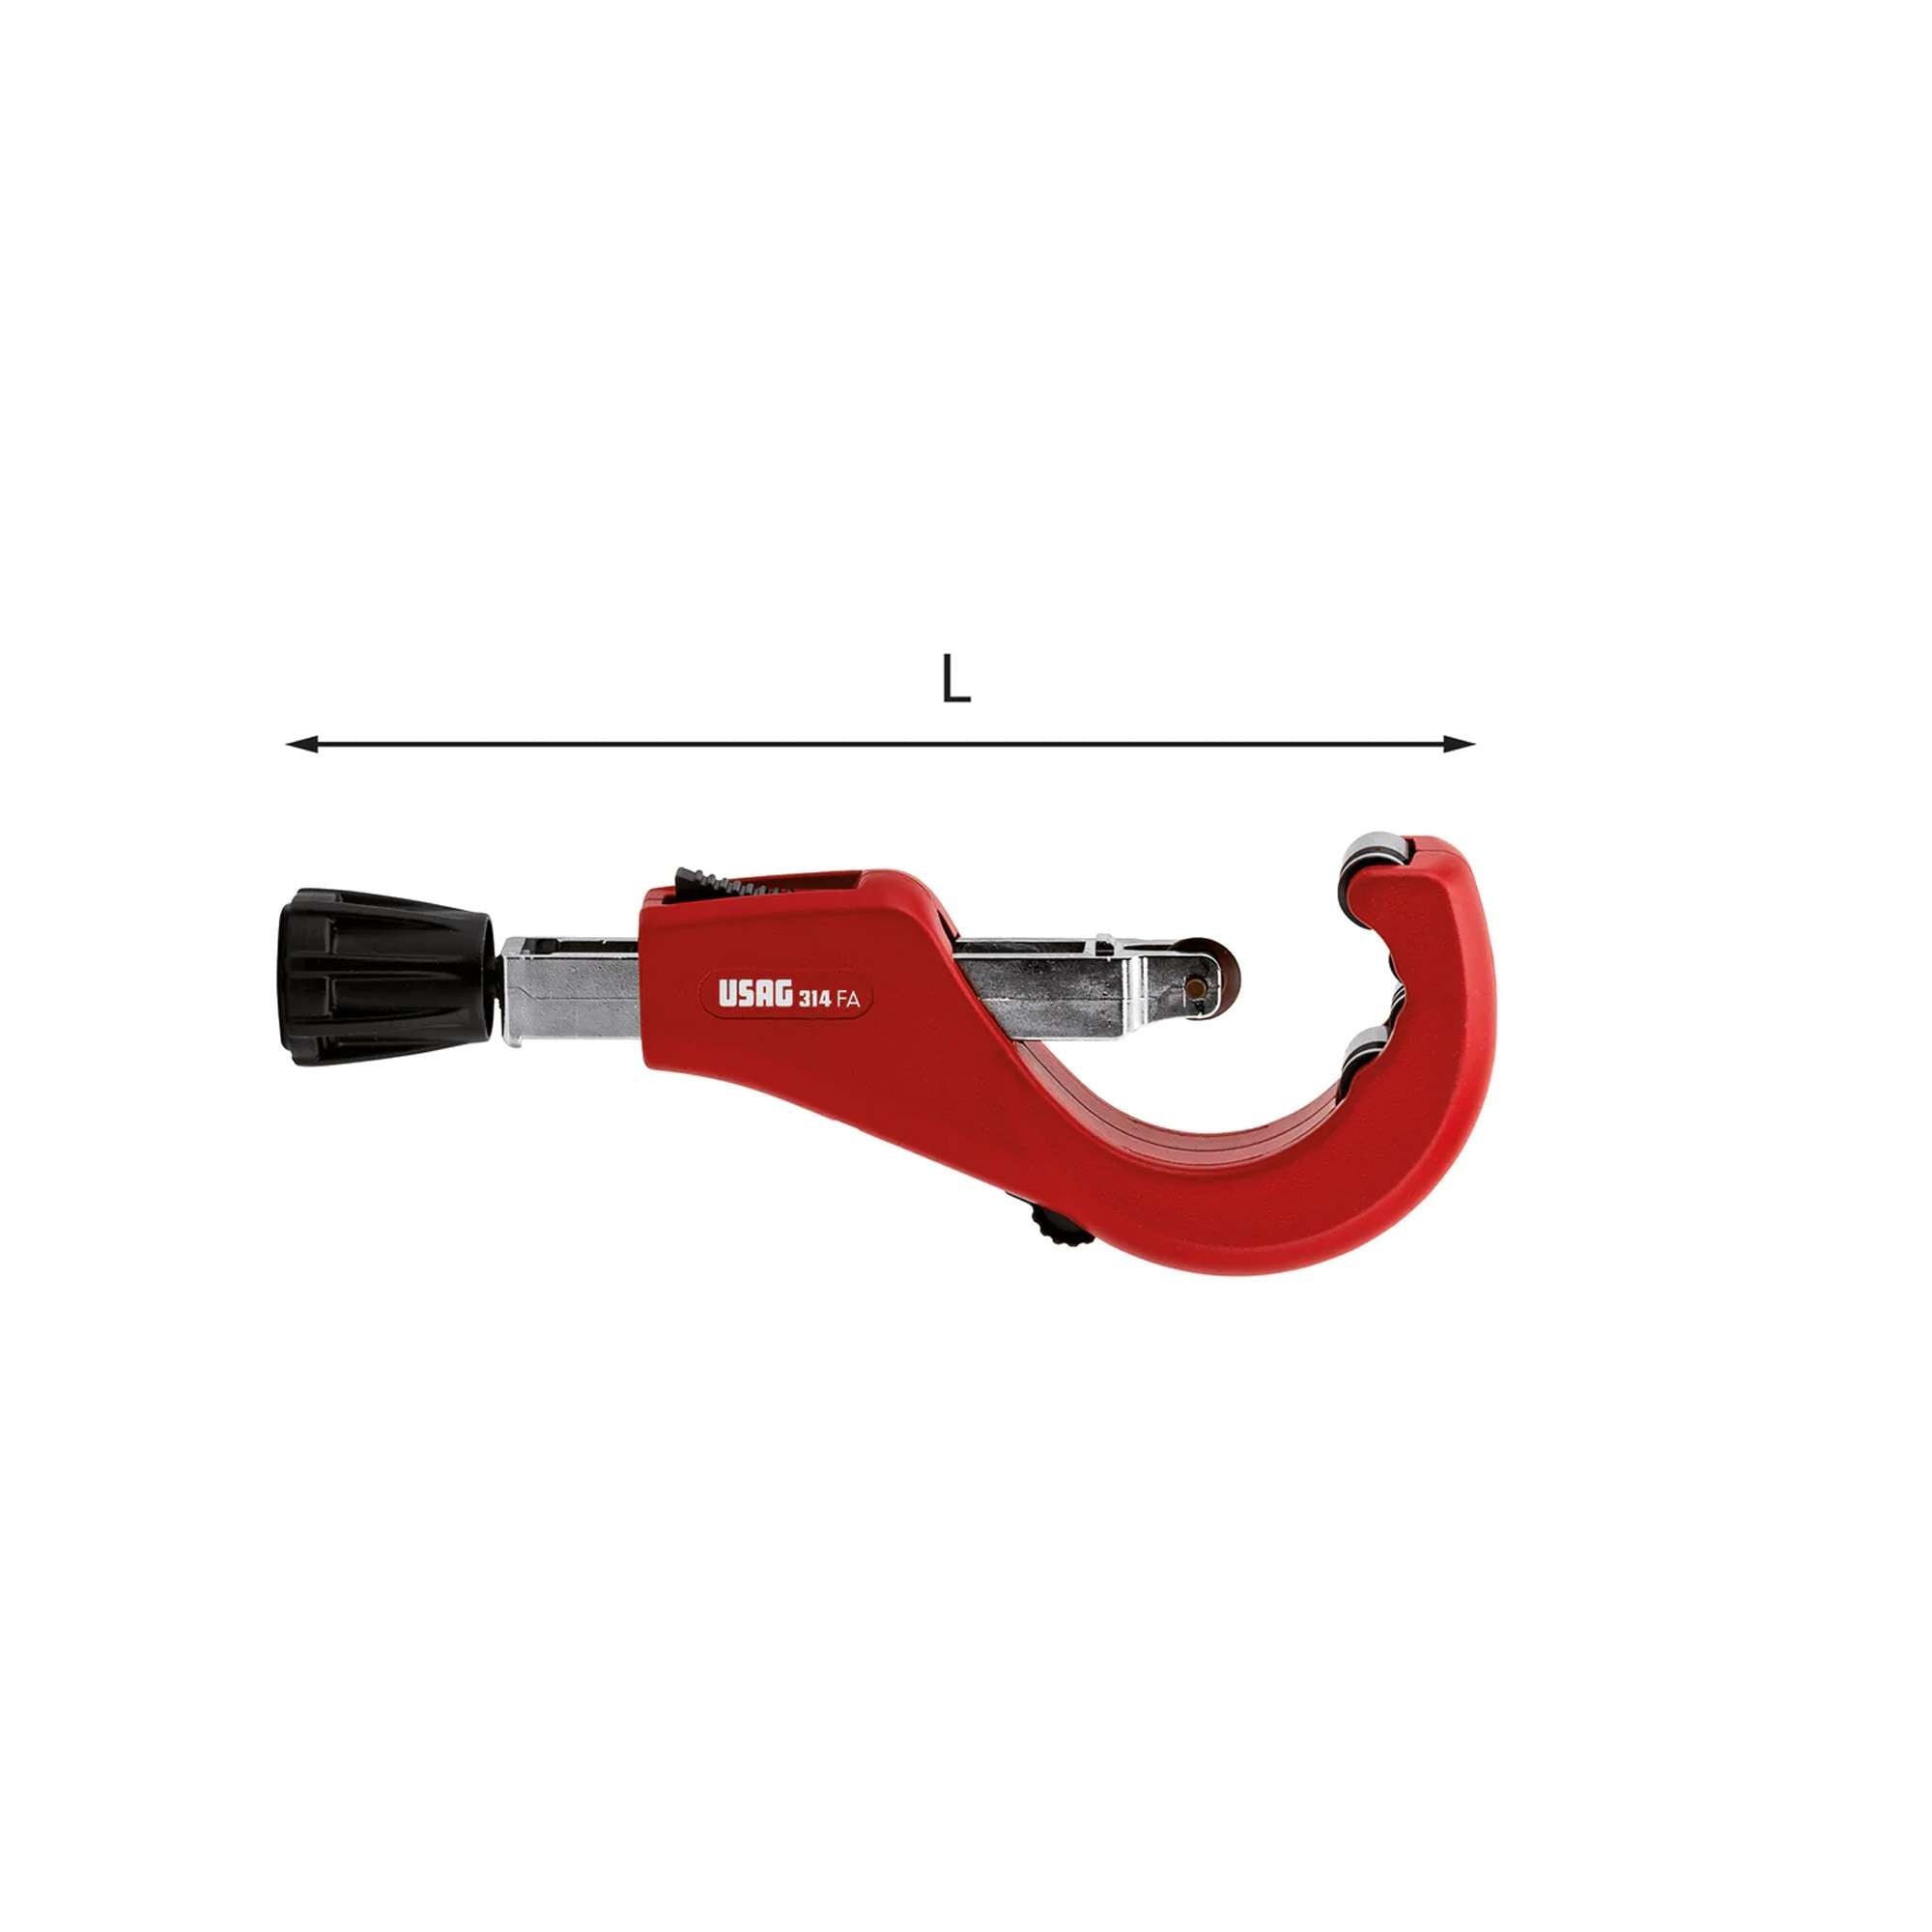 Tube pipe cutter for copper and light alloy tube  6-76mm  1/4-3" 890gr 314 FA